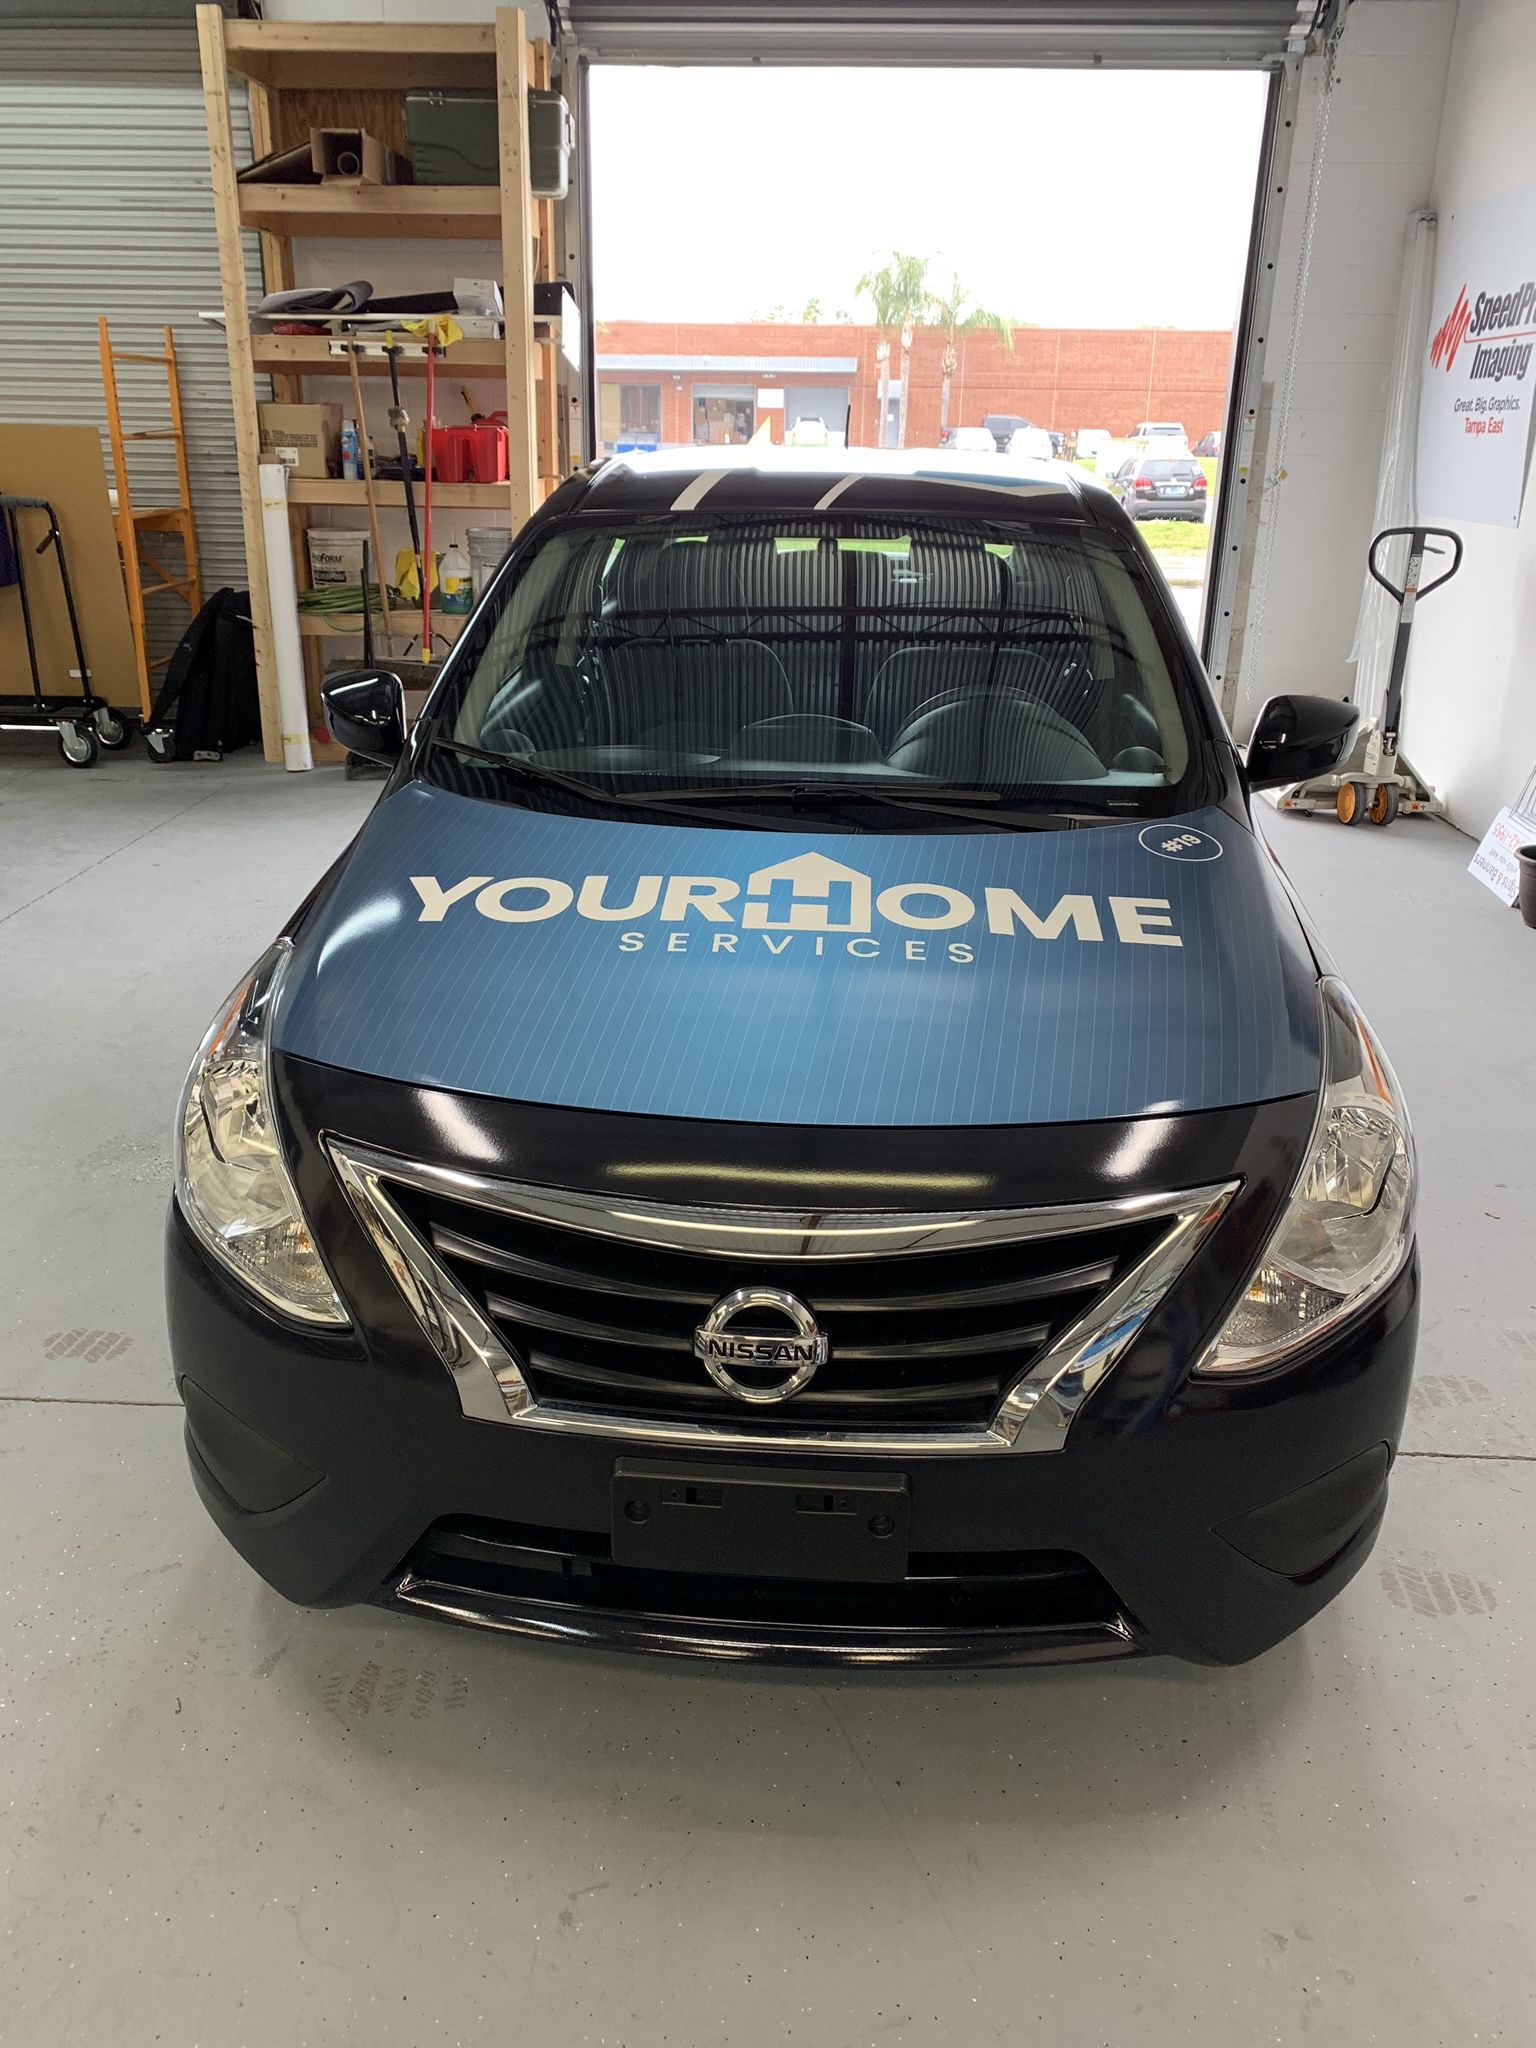 your home services nissan wrap in blue 